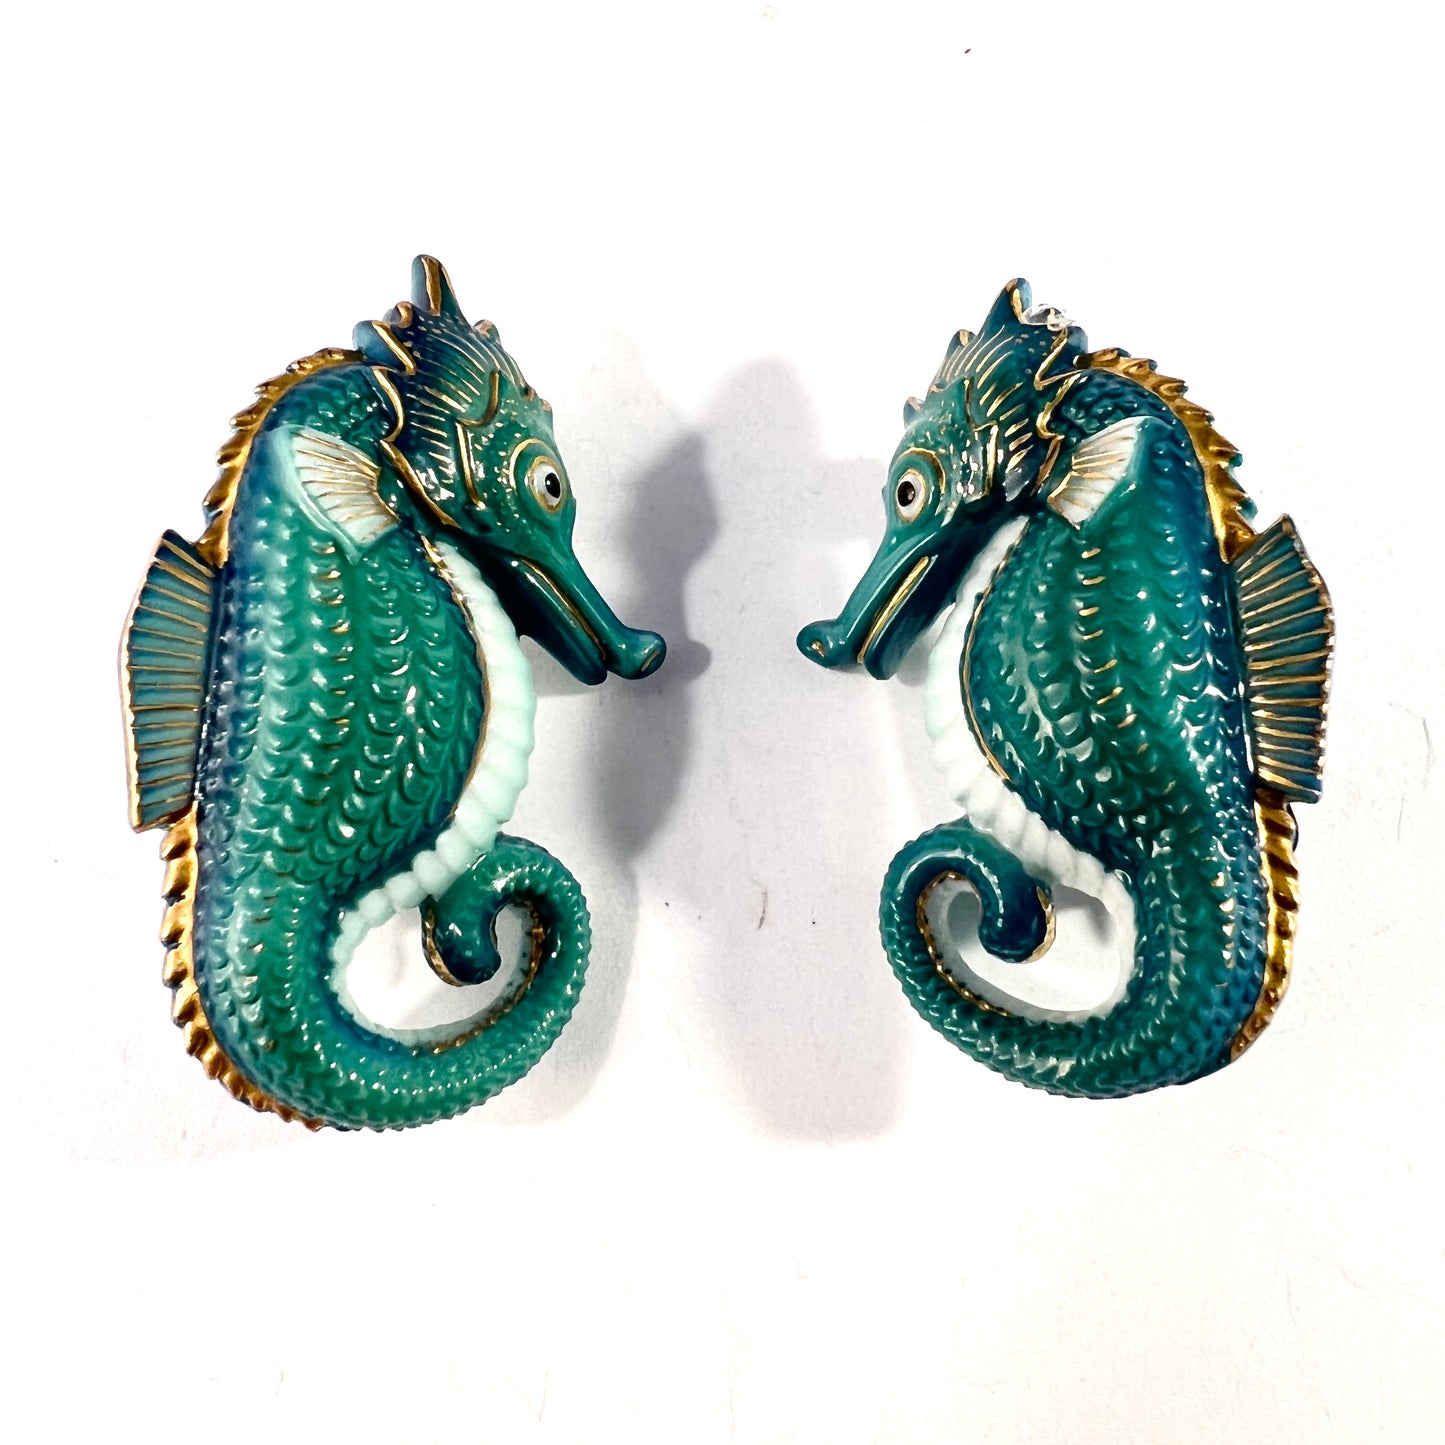 Japan 1950-60s. Vintage Toshikane  Porcelain Pair of Seahorse Brooches.